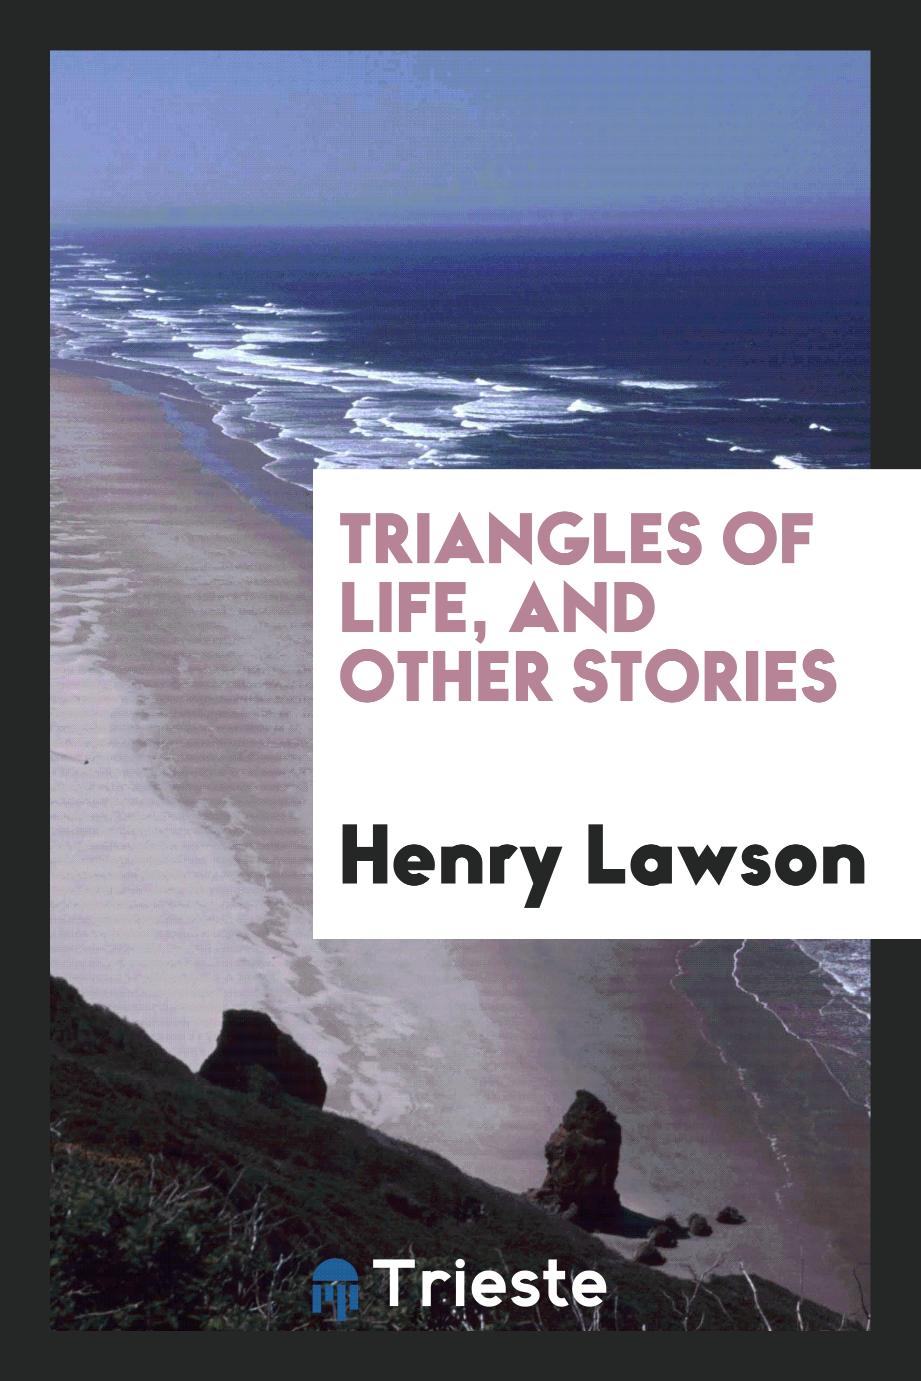 Triangles of life, and other stories